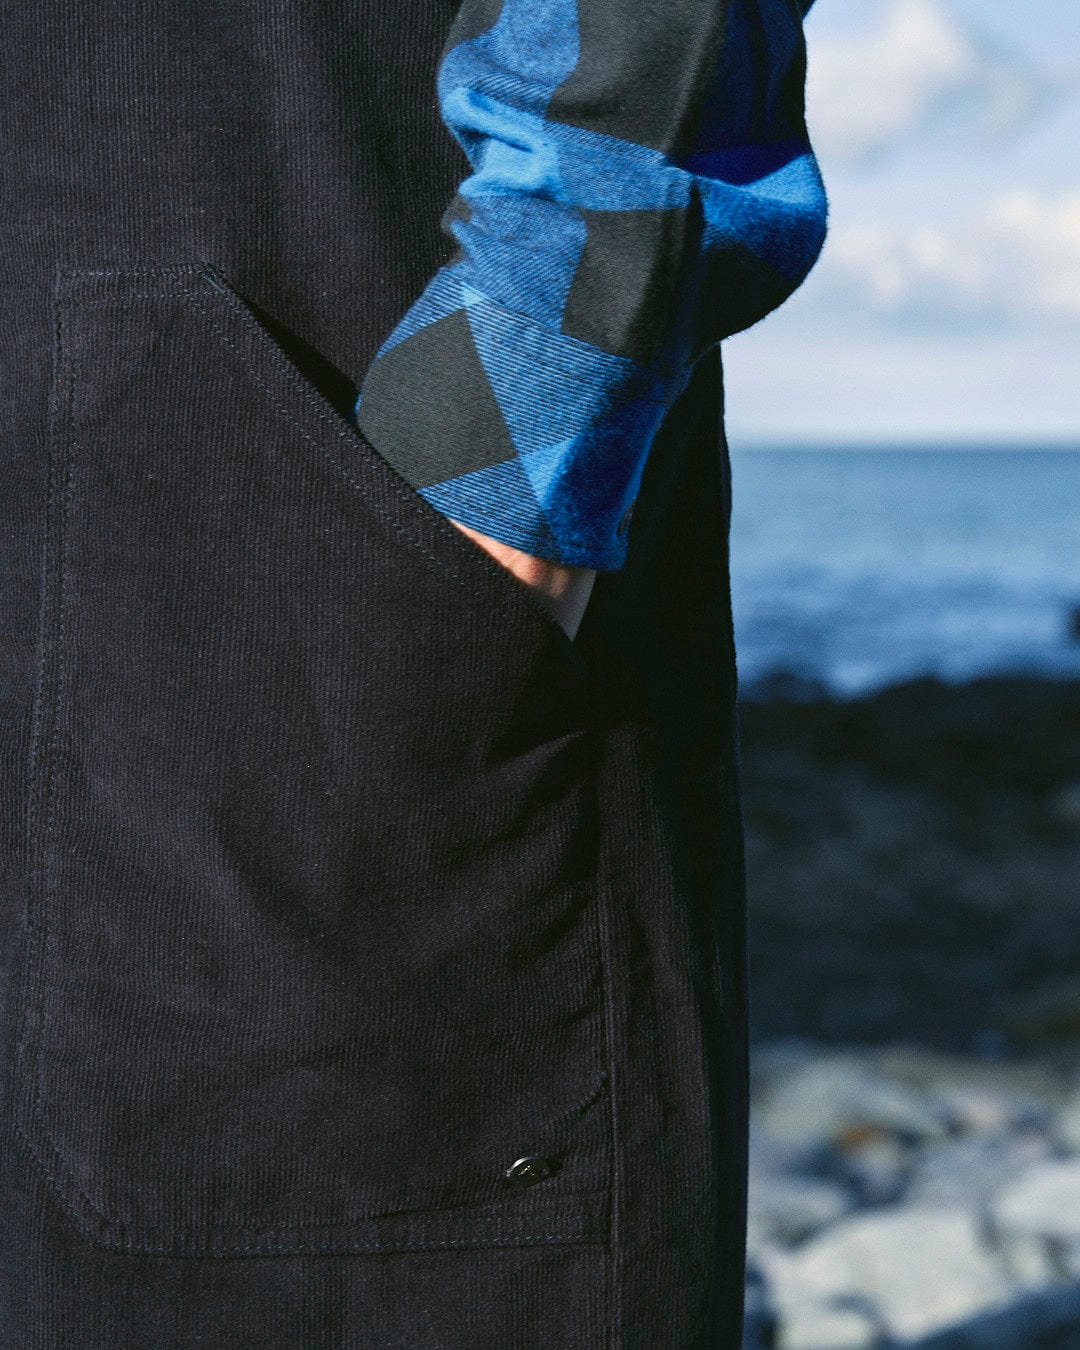 A stylish man wearing the Saltrock Nancy - Womens Cord Dungaree - Dark Blue standing next to the ocean.